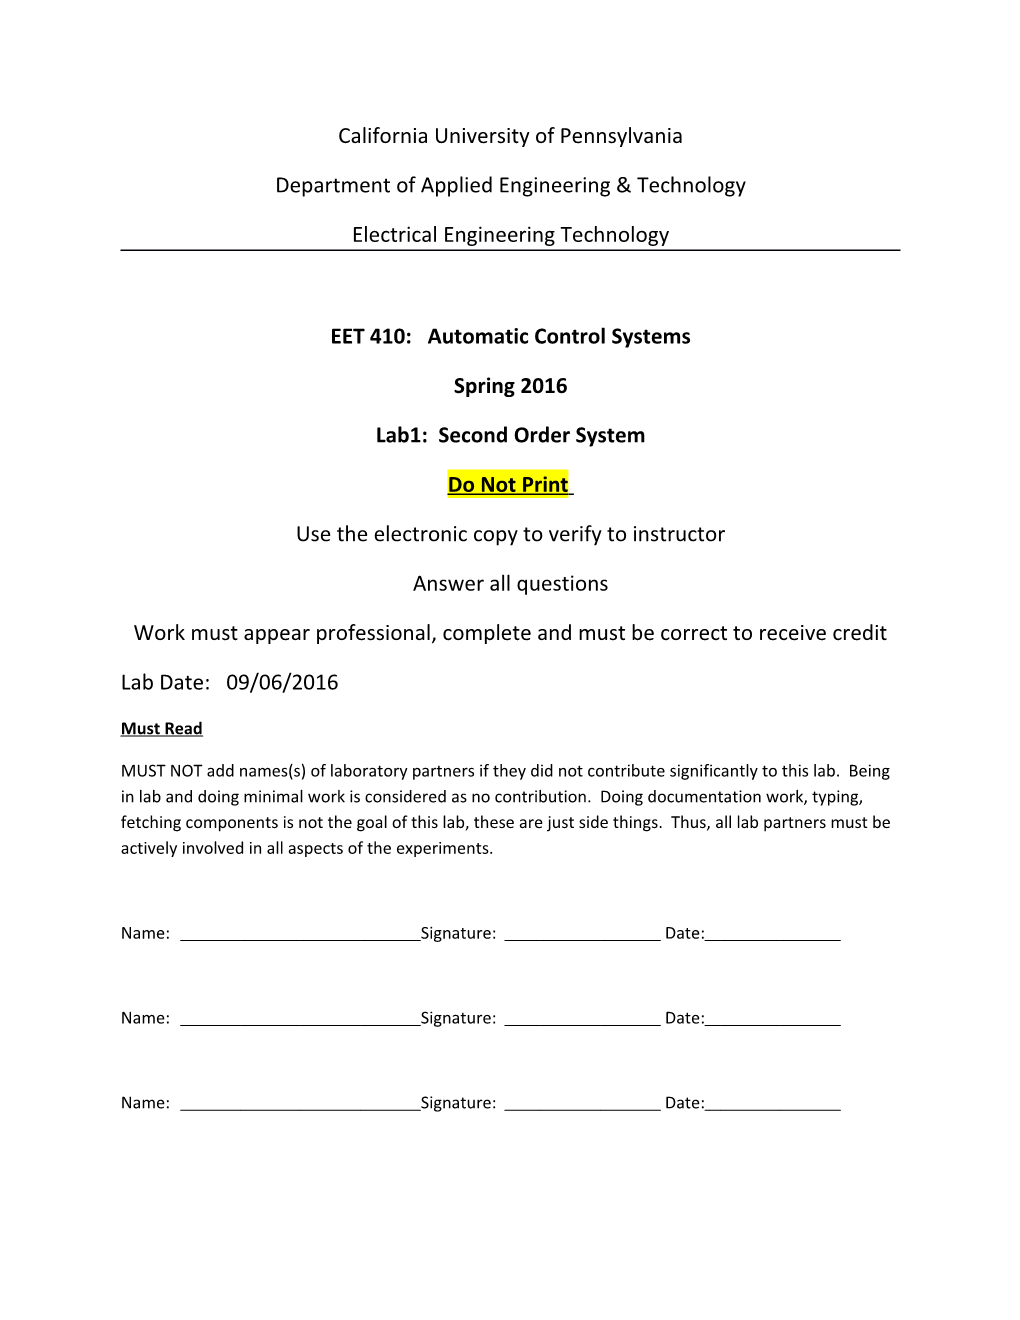 Department of Applied Engineering & Technology s1